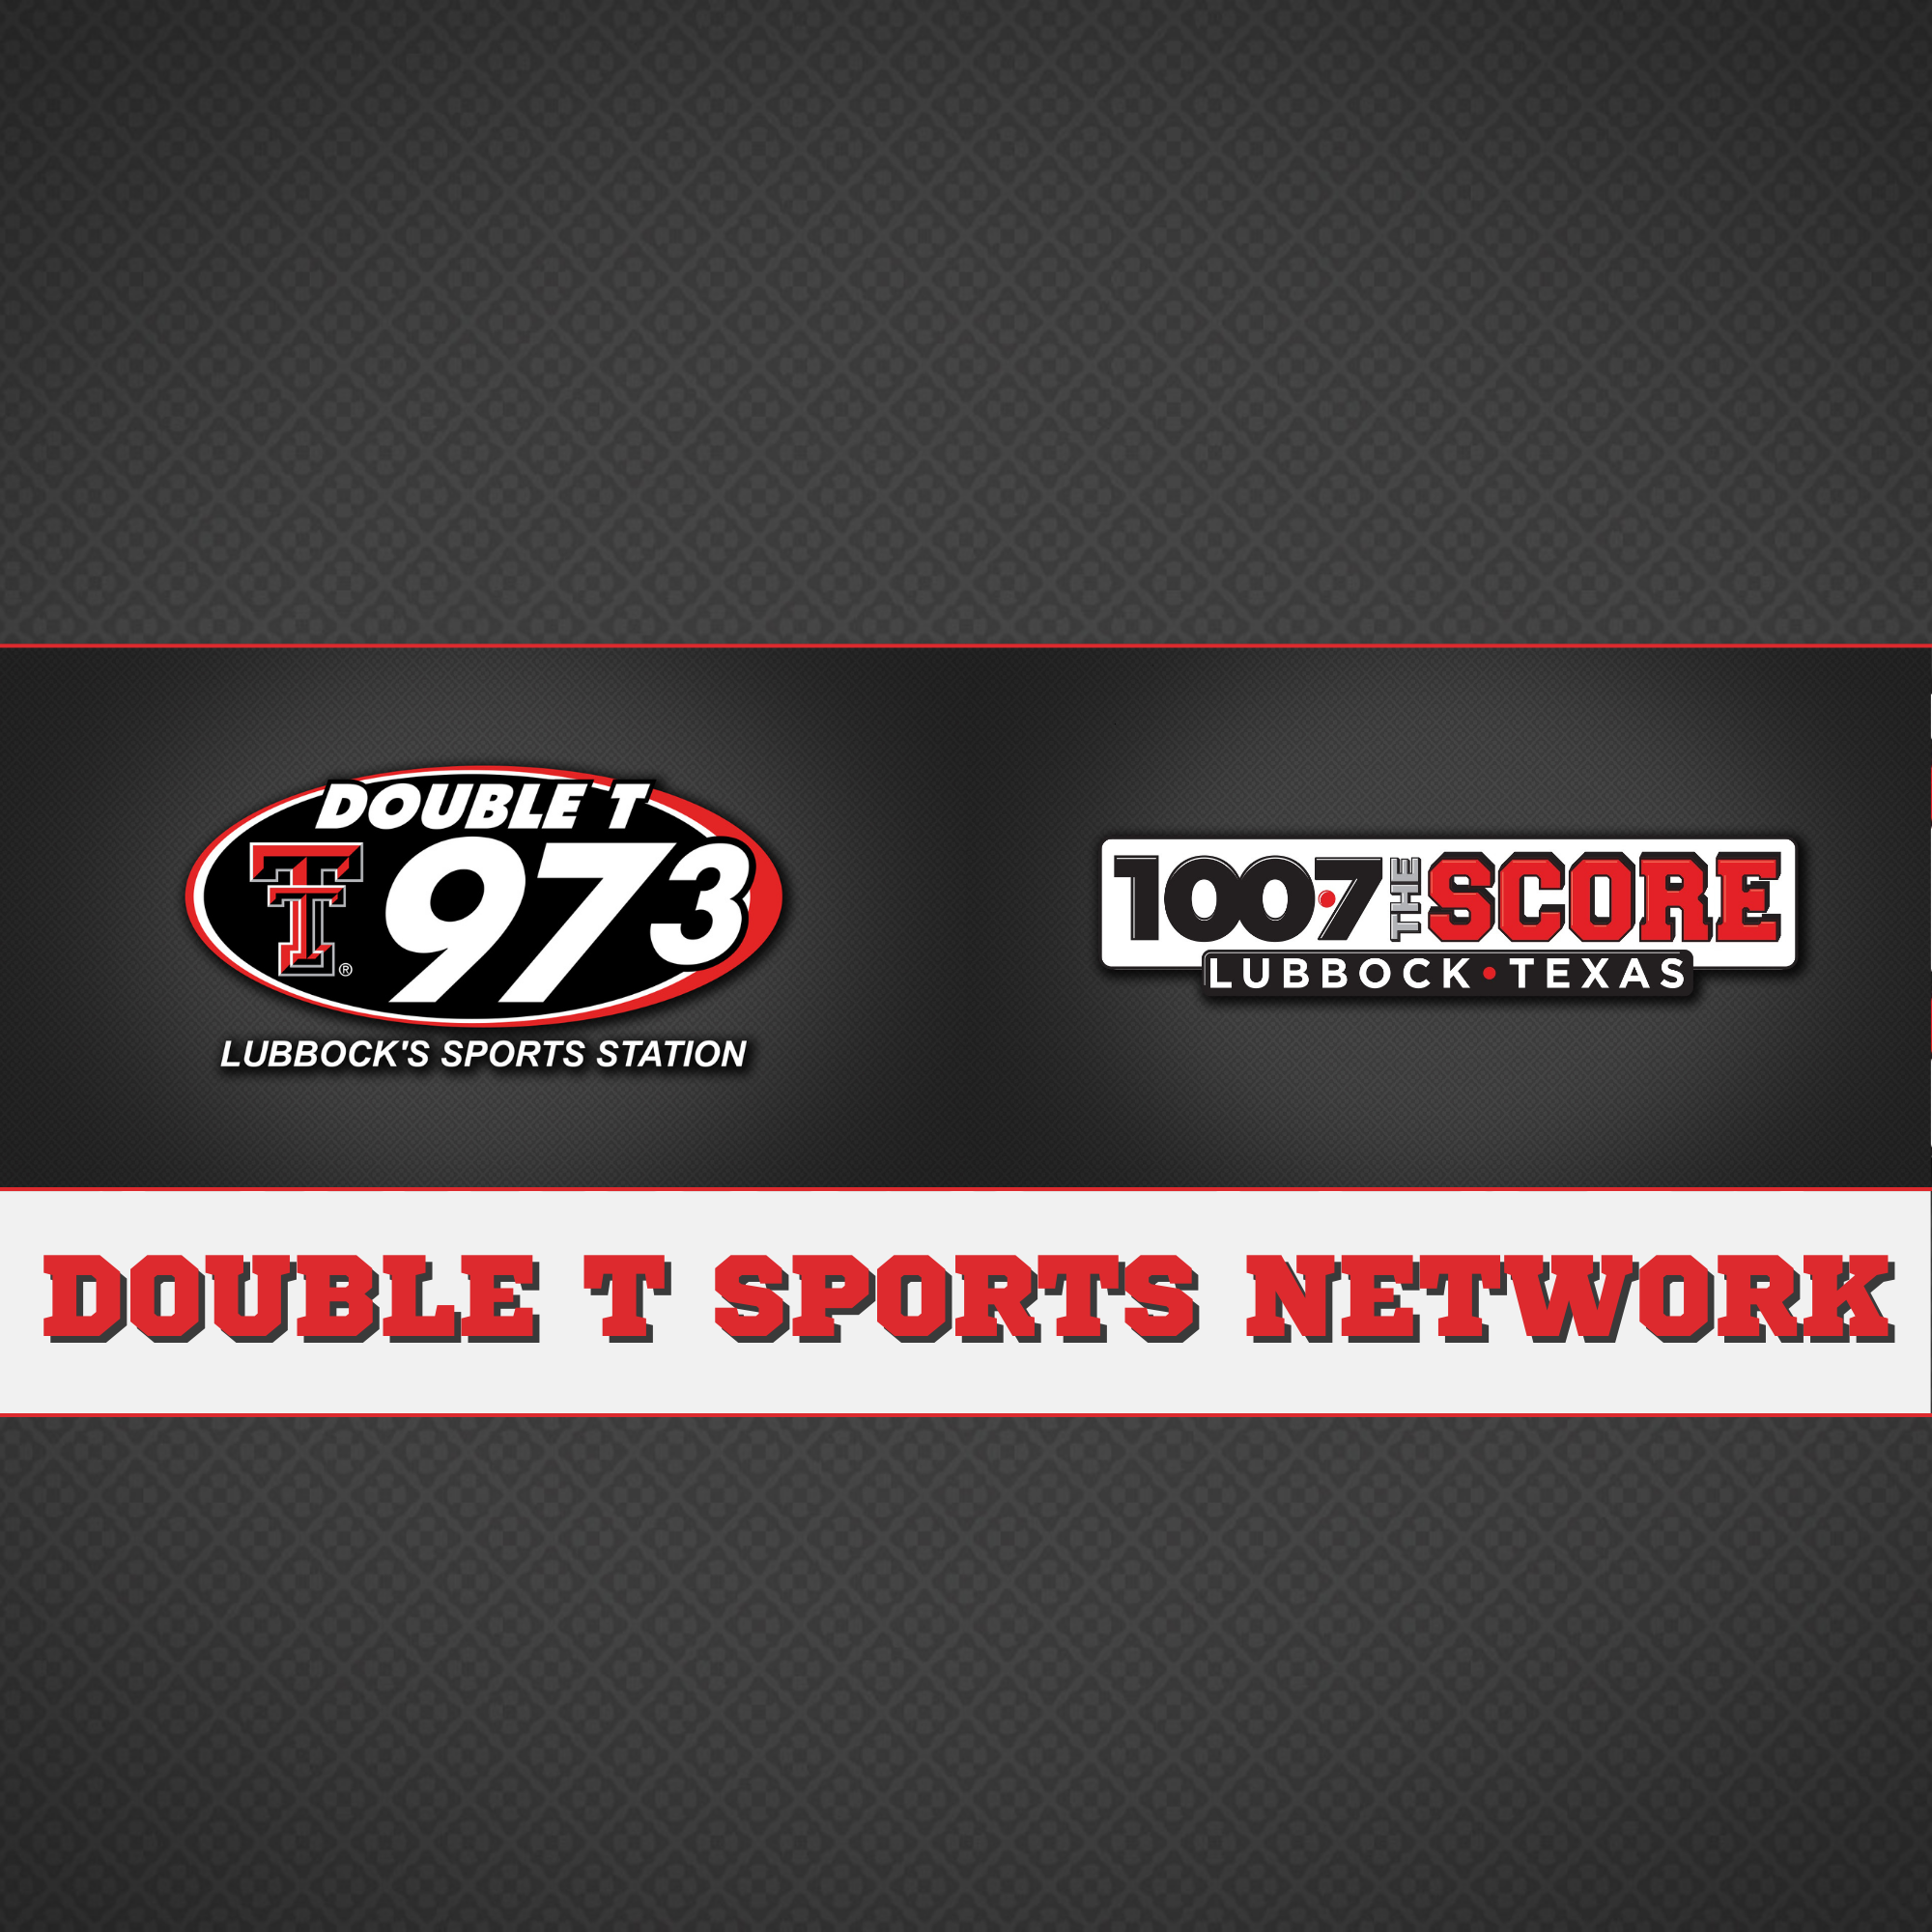 Double T Sports Network